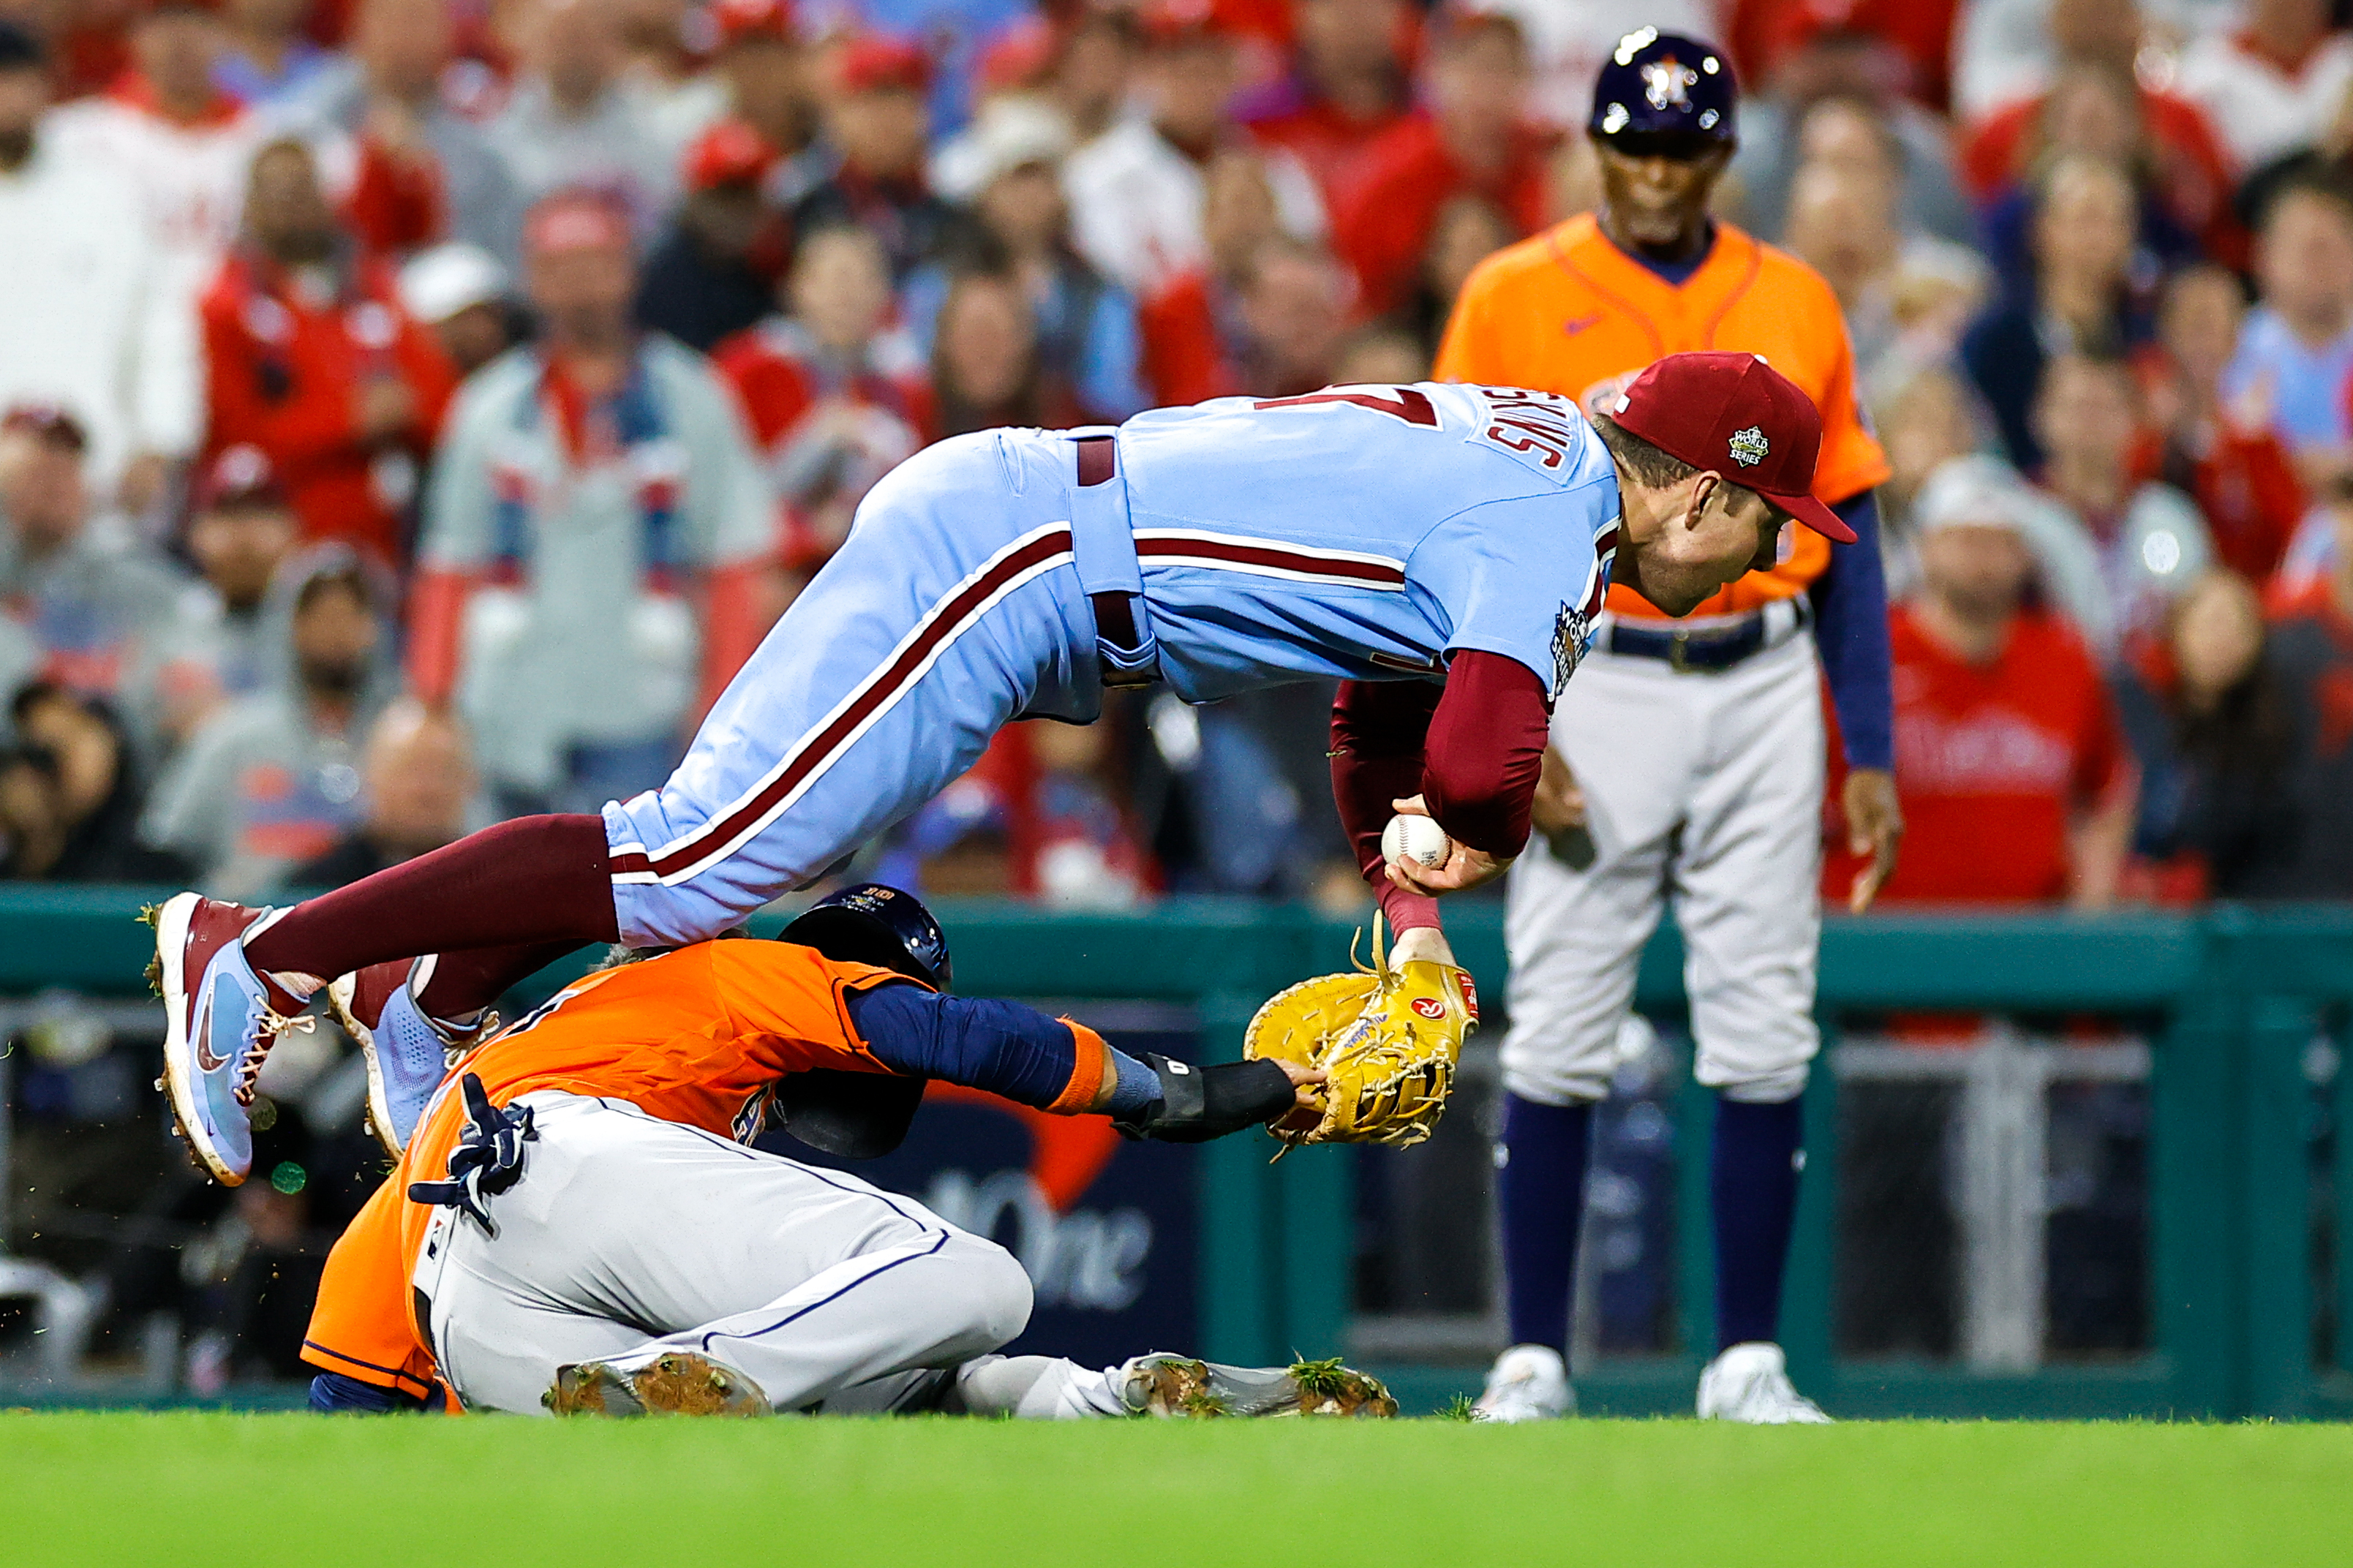 Phillies vs. Astros final score, results: Houston rides Framber Valdez's  arm to Game 2 win, series tie